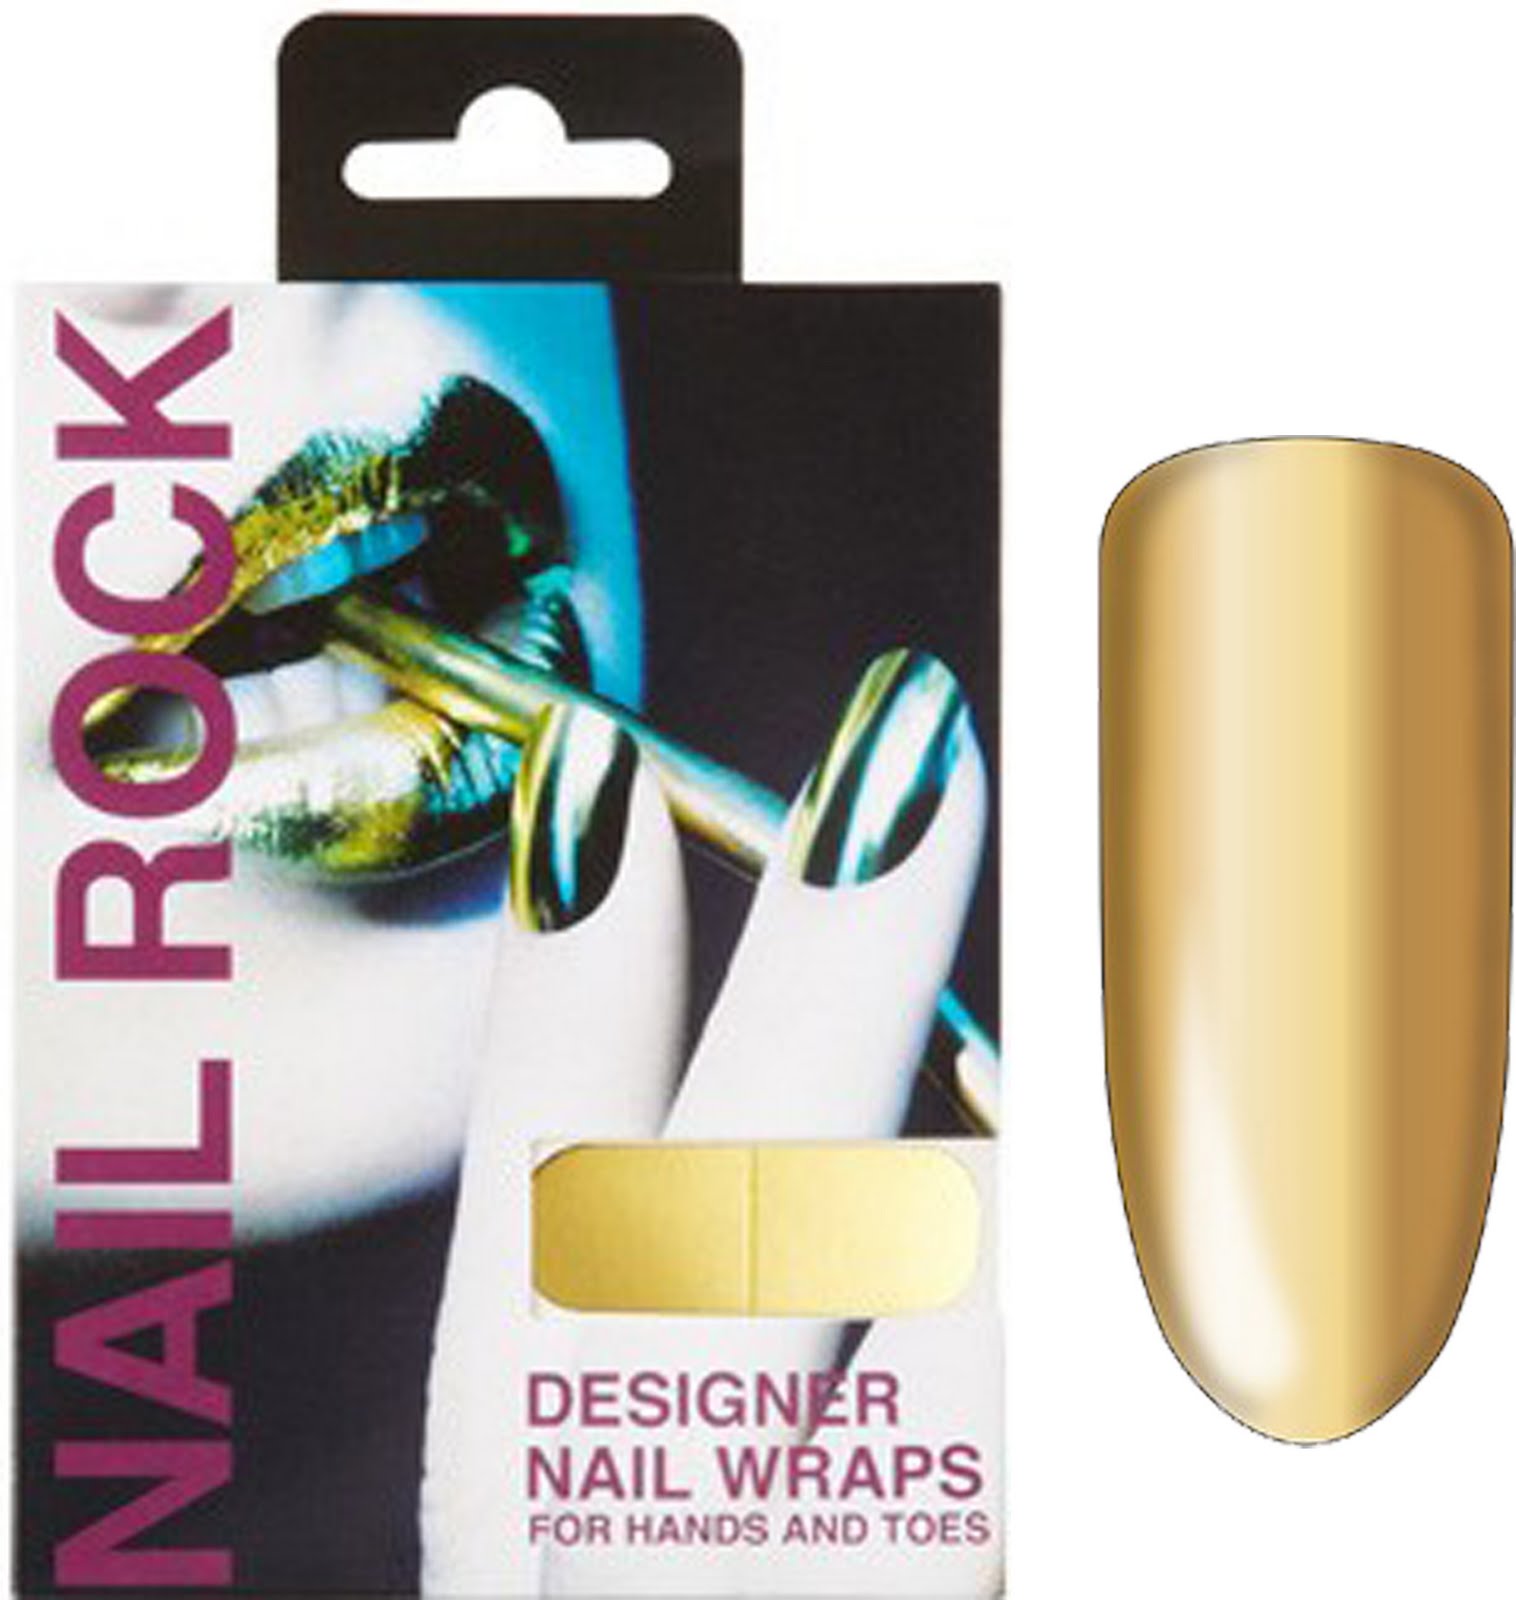 The nail wraps from Nail Rock are perfect for people that likes to use fun